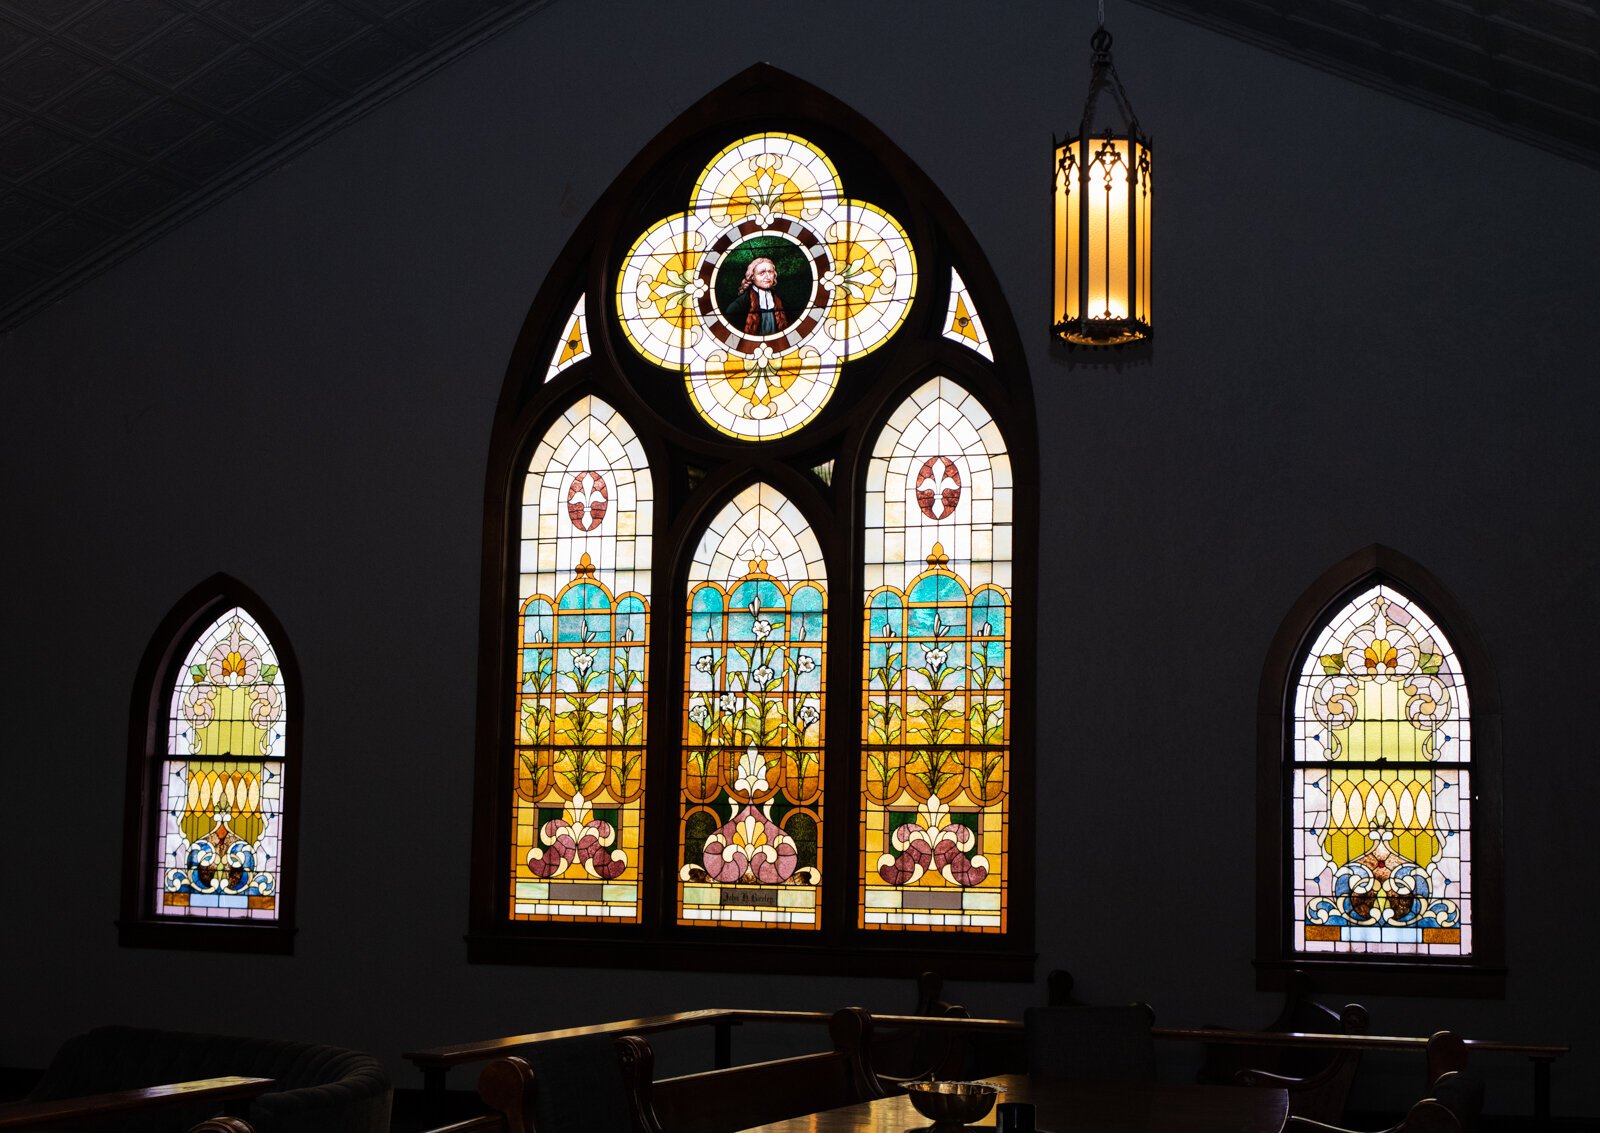 The Sanctuary is a renovated 1903 Gothic-style church that's been converted to an Airbnb and event venue blocks away from historic downtown Wabash.